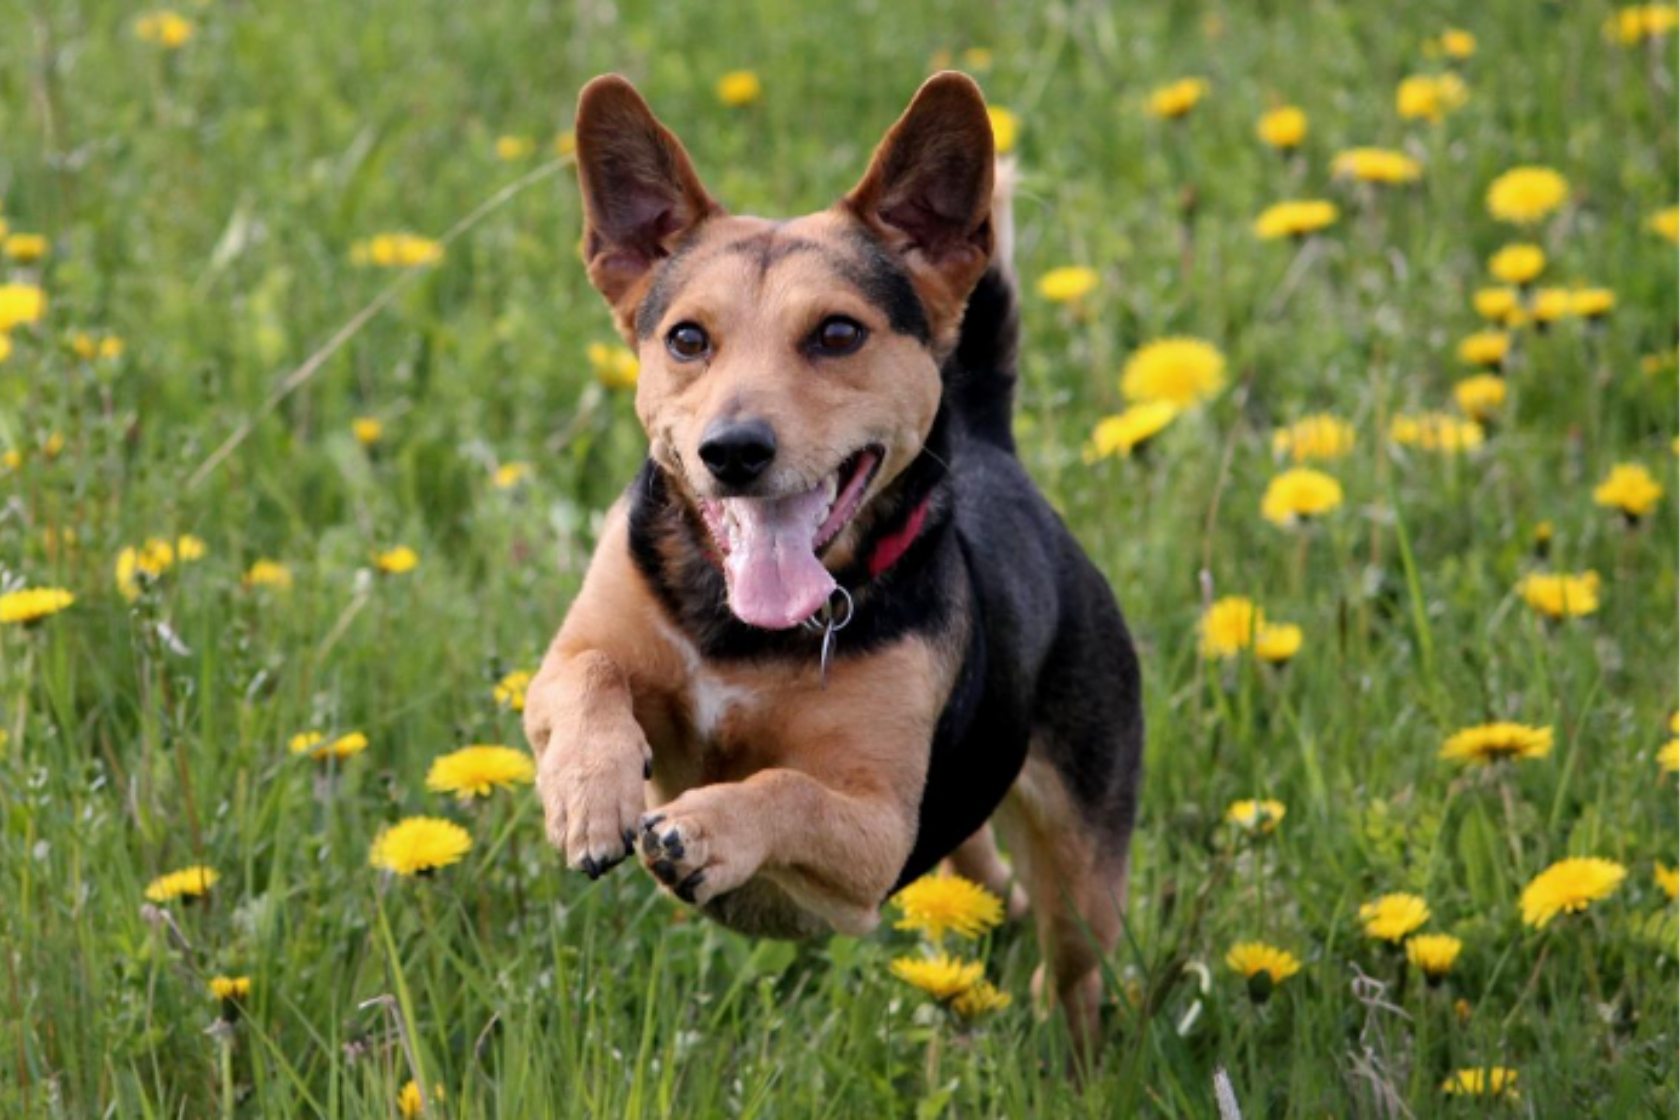 Happy dog jumping in a field of buttercups